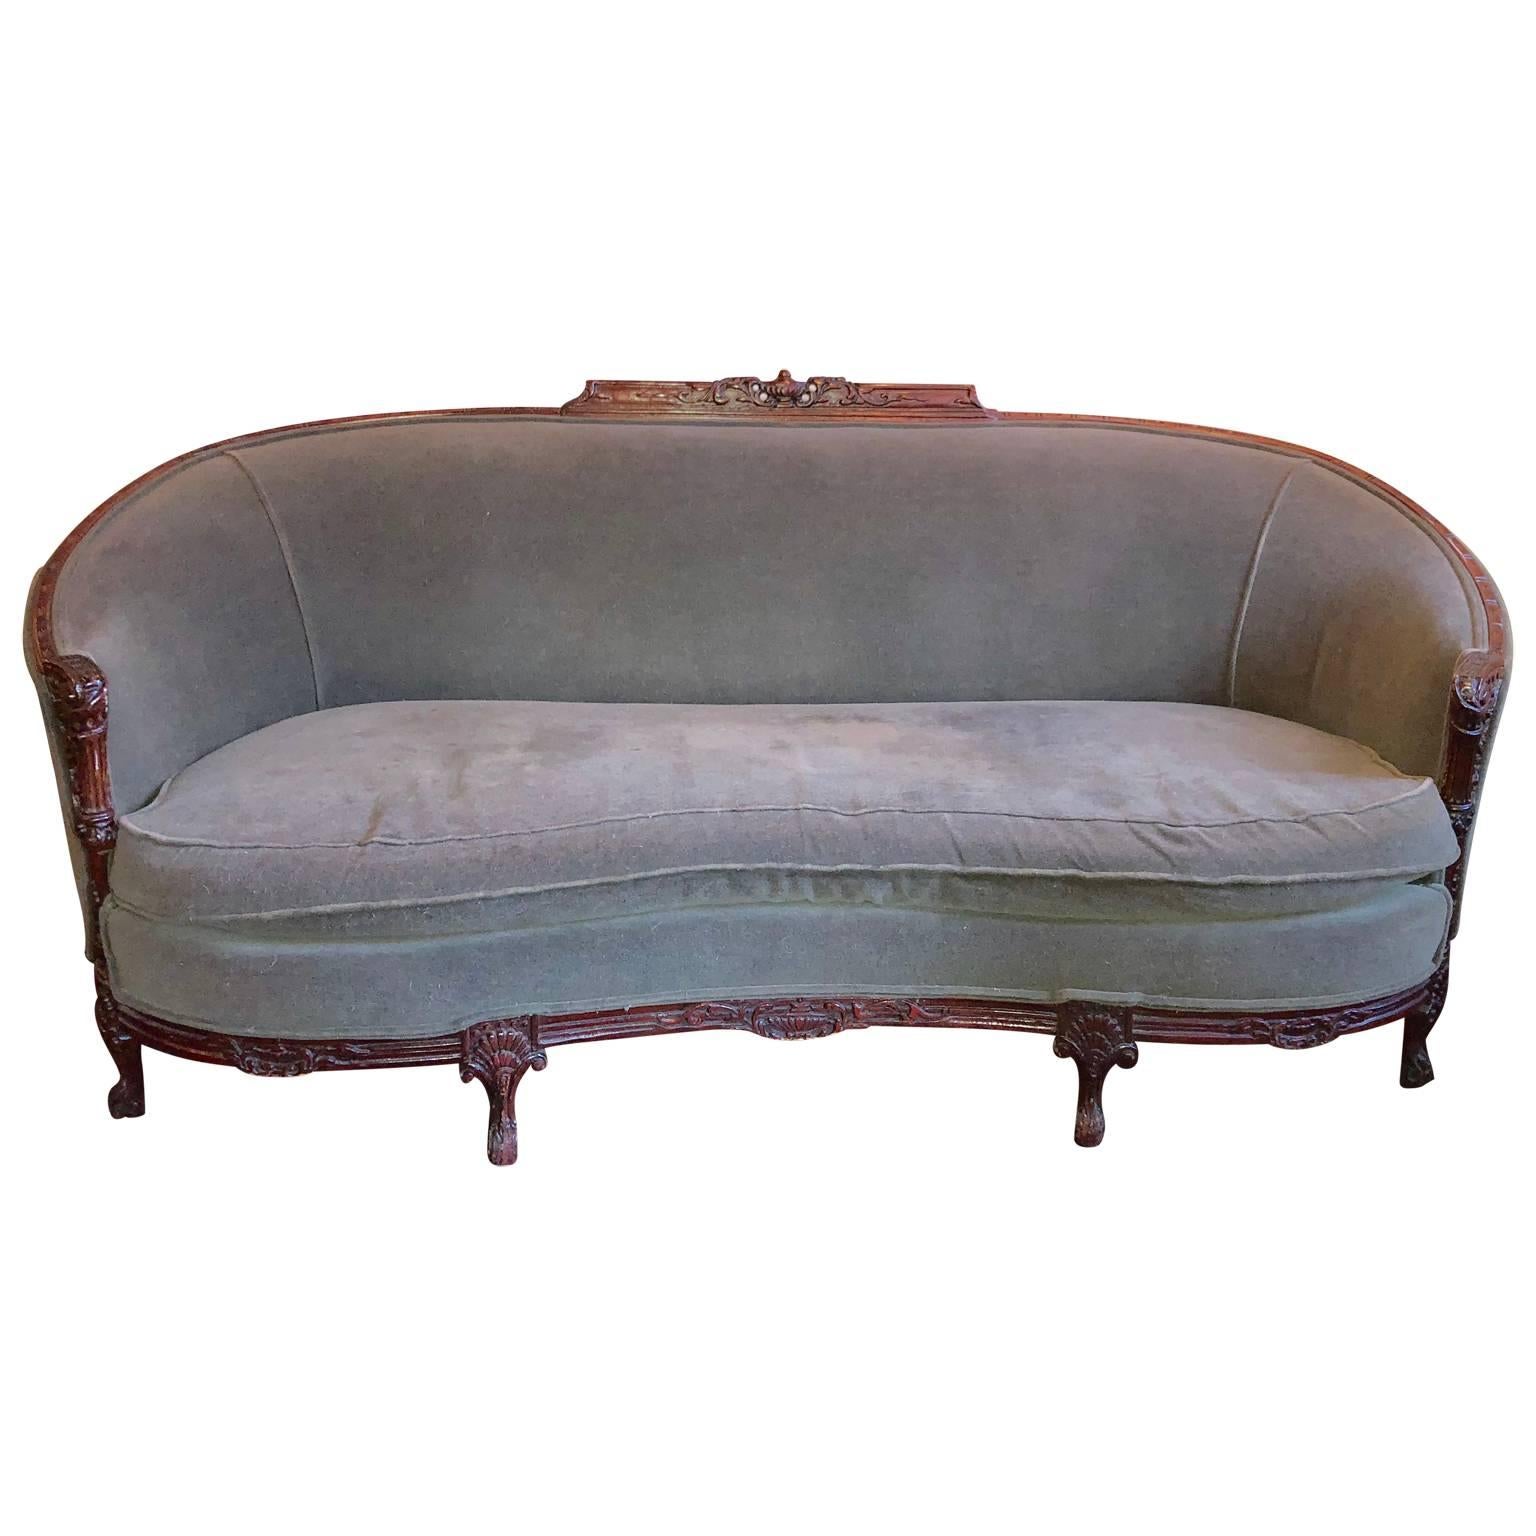 Set of early 20th Century furniture by Philadelphia Department store Gimbel Brothers. Wingback and Club chairs are in the original Naugahyde upholstery including the original Gimbel label, the sofa in a later light grey mohair.